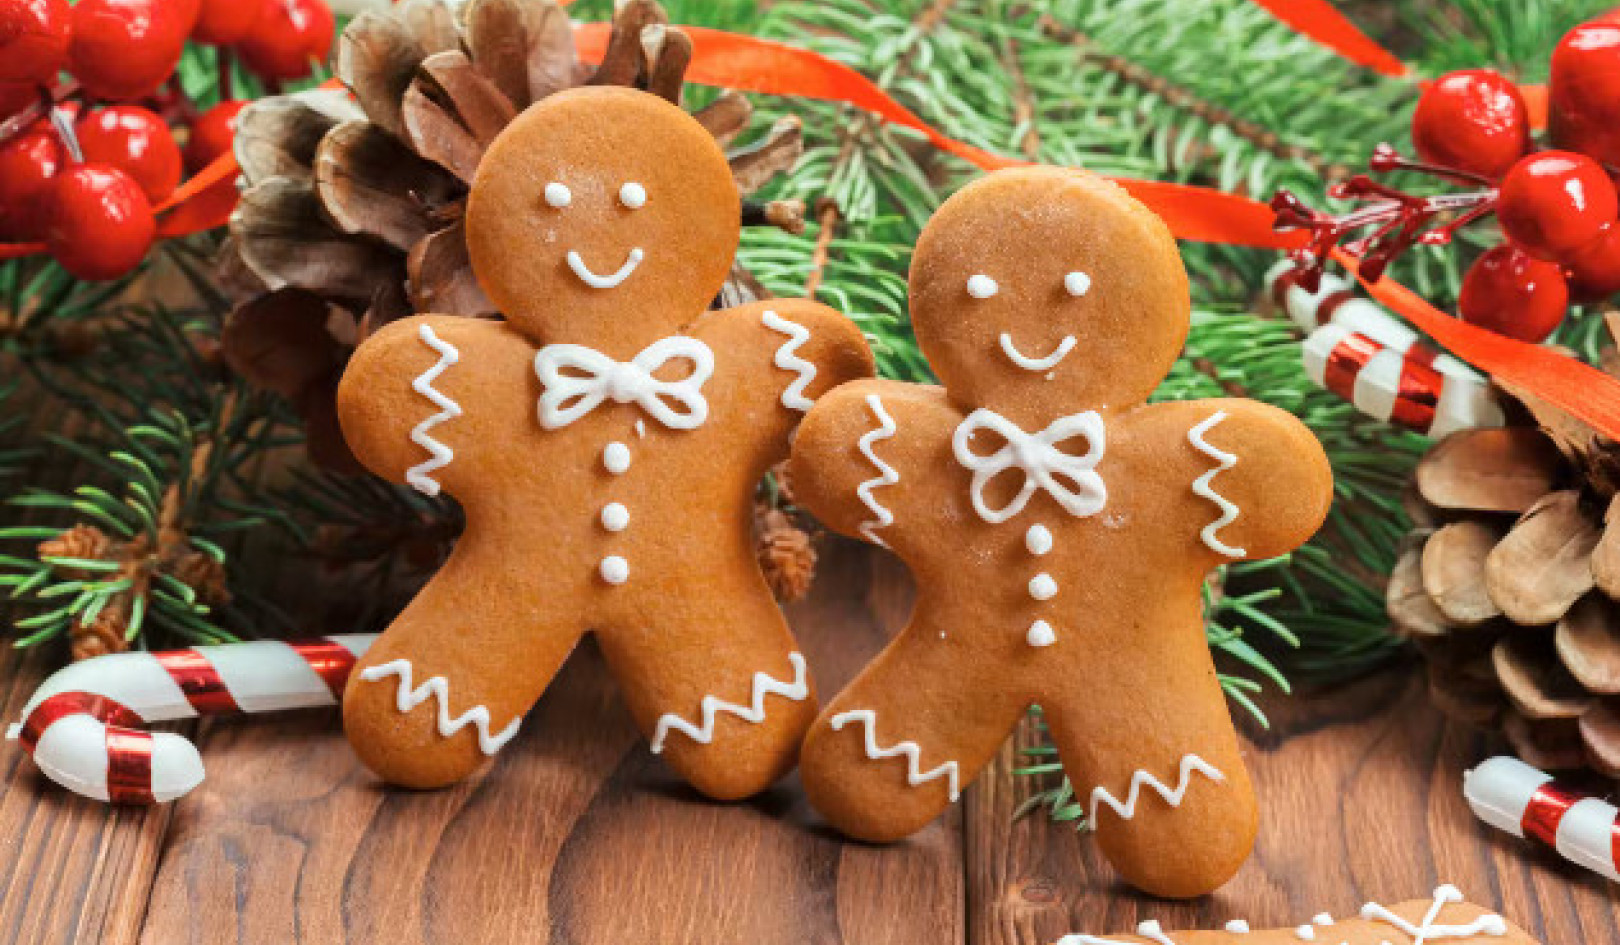 Discover the Health-Boosting Ingredients of Traditional Gingerbread